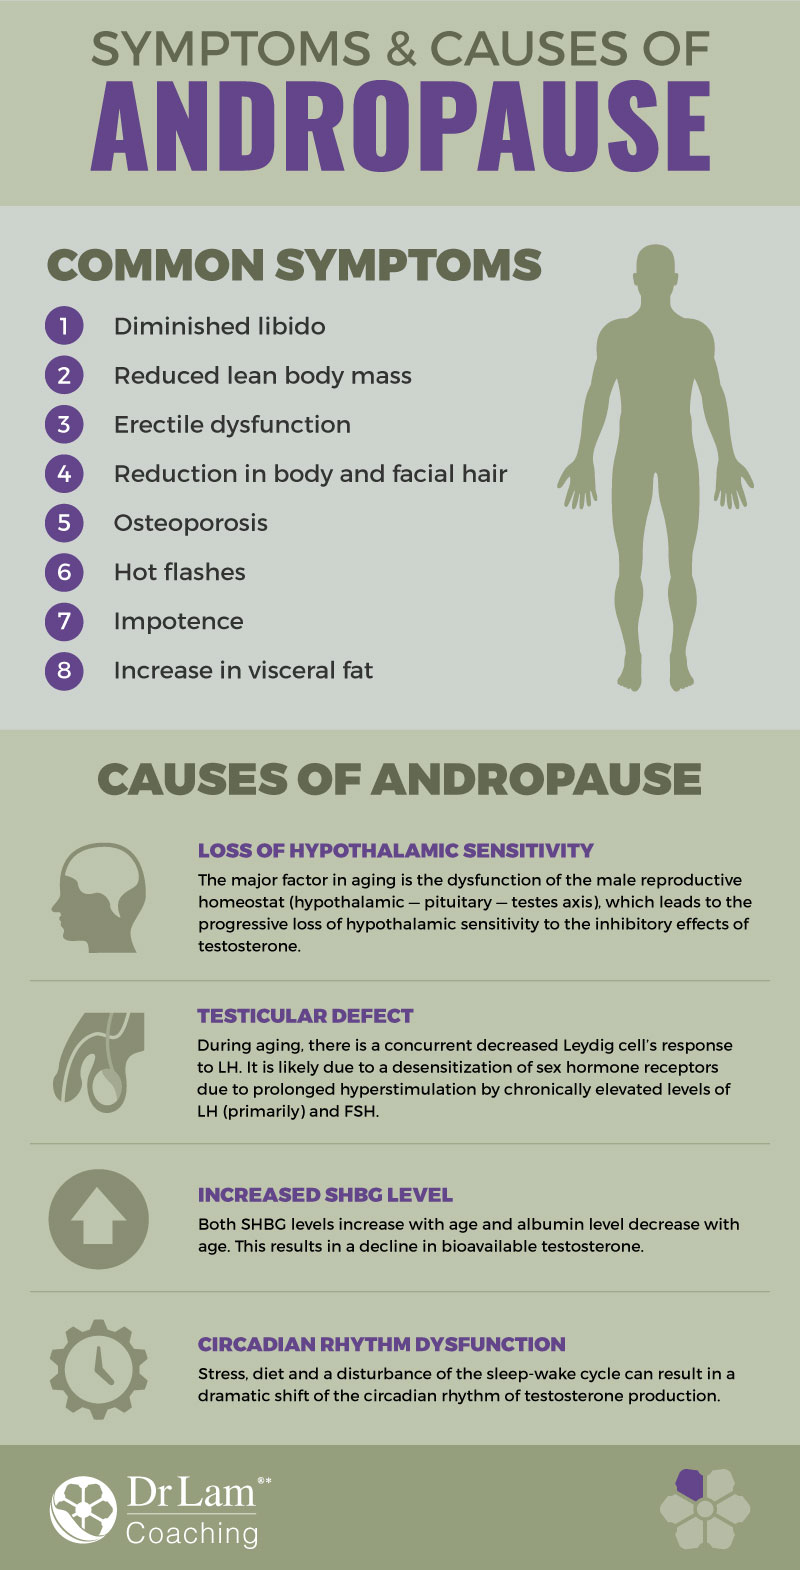 Check out this easy to understand infographic about symptoms and causes of andropause